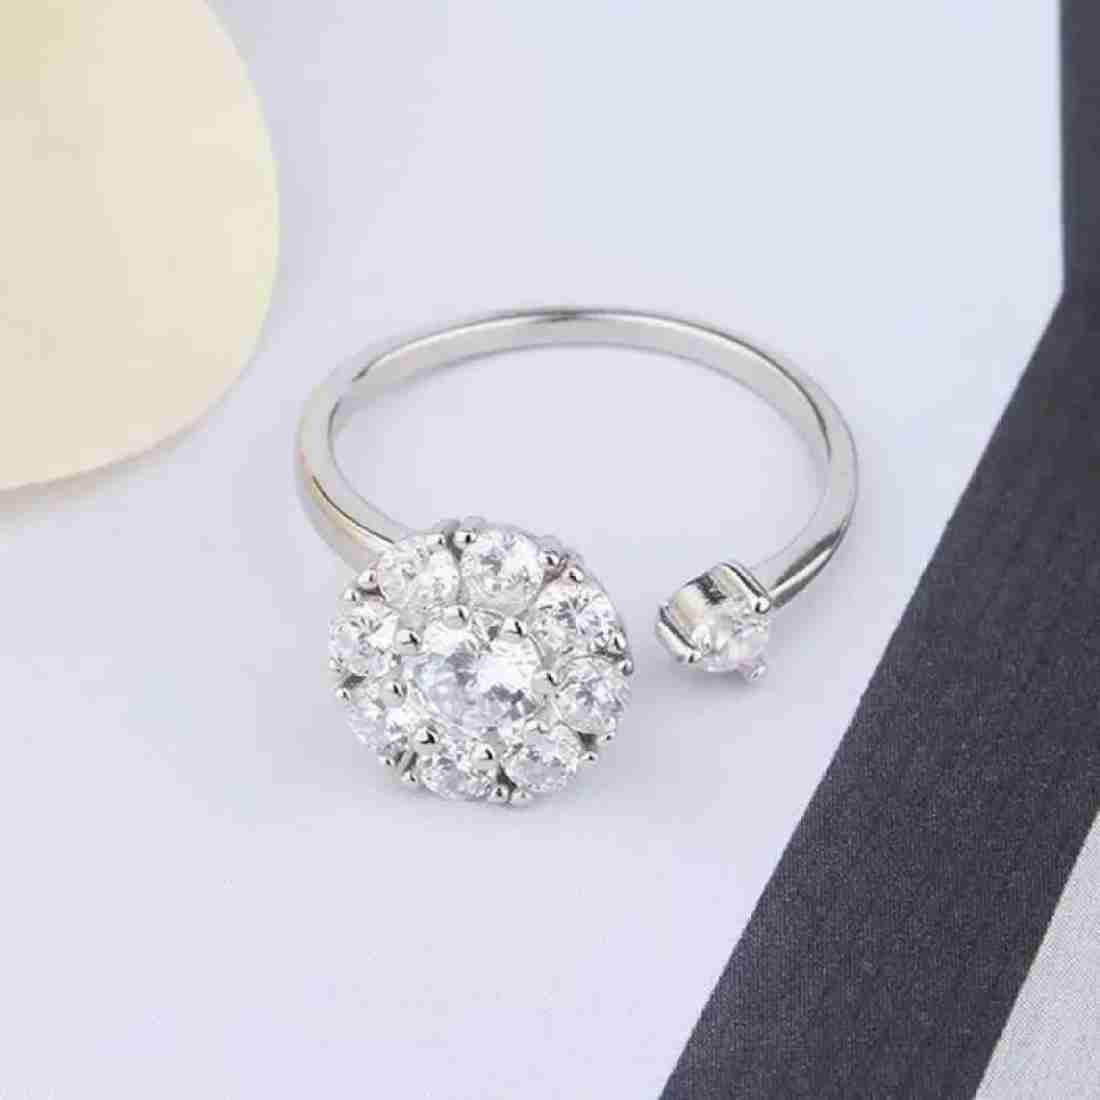 SOLITAIRE SILVER ROTATING ADJUSTABLE RING || BEST GIFT FOR HER || SALE